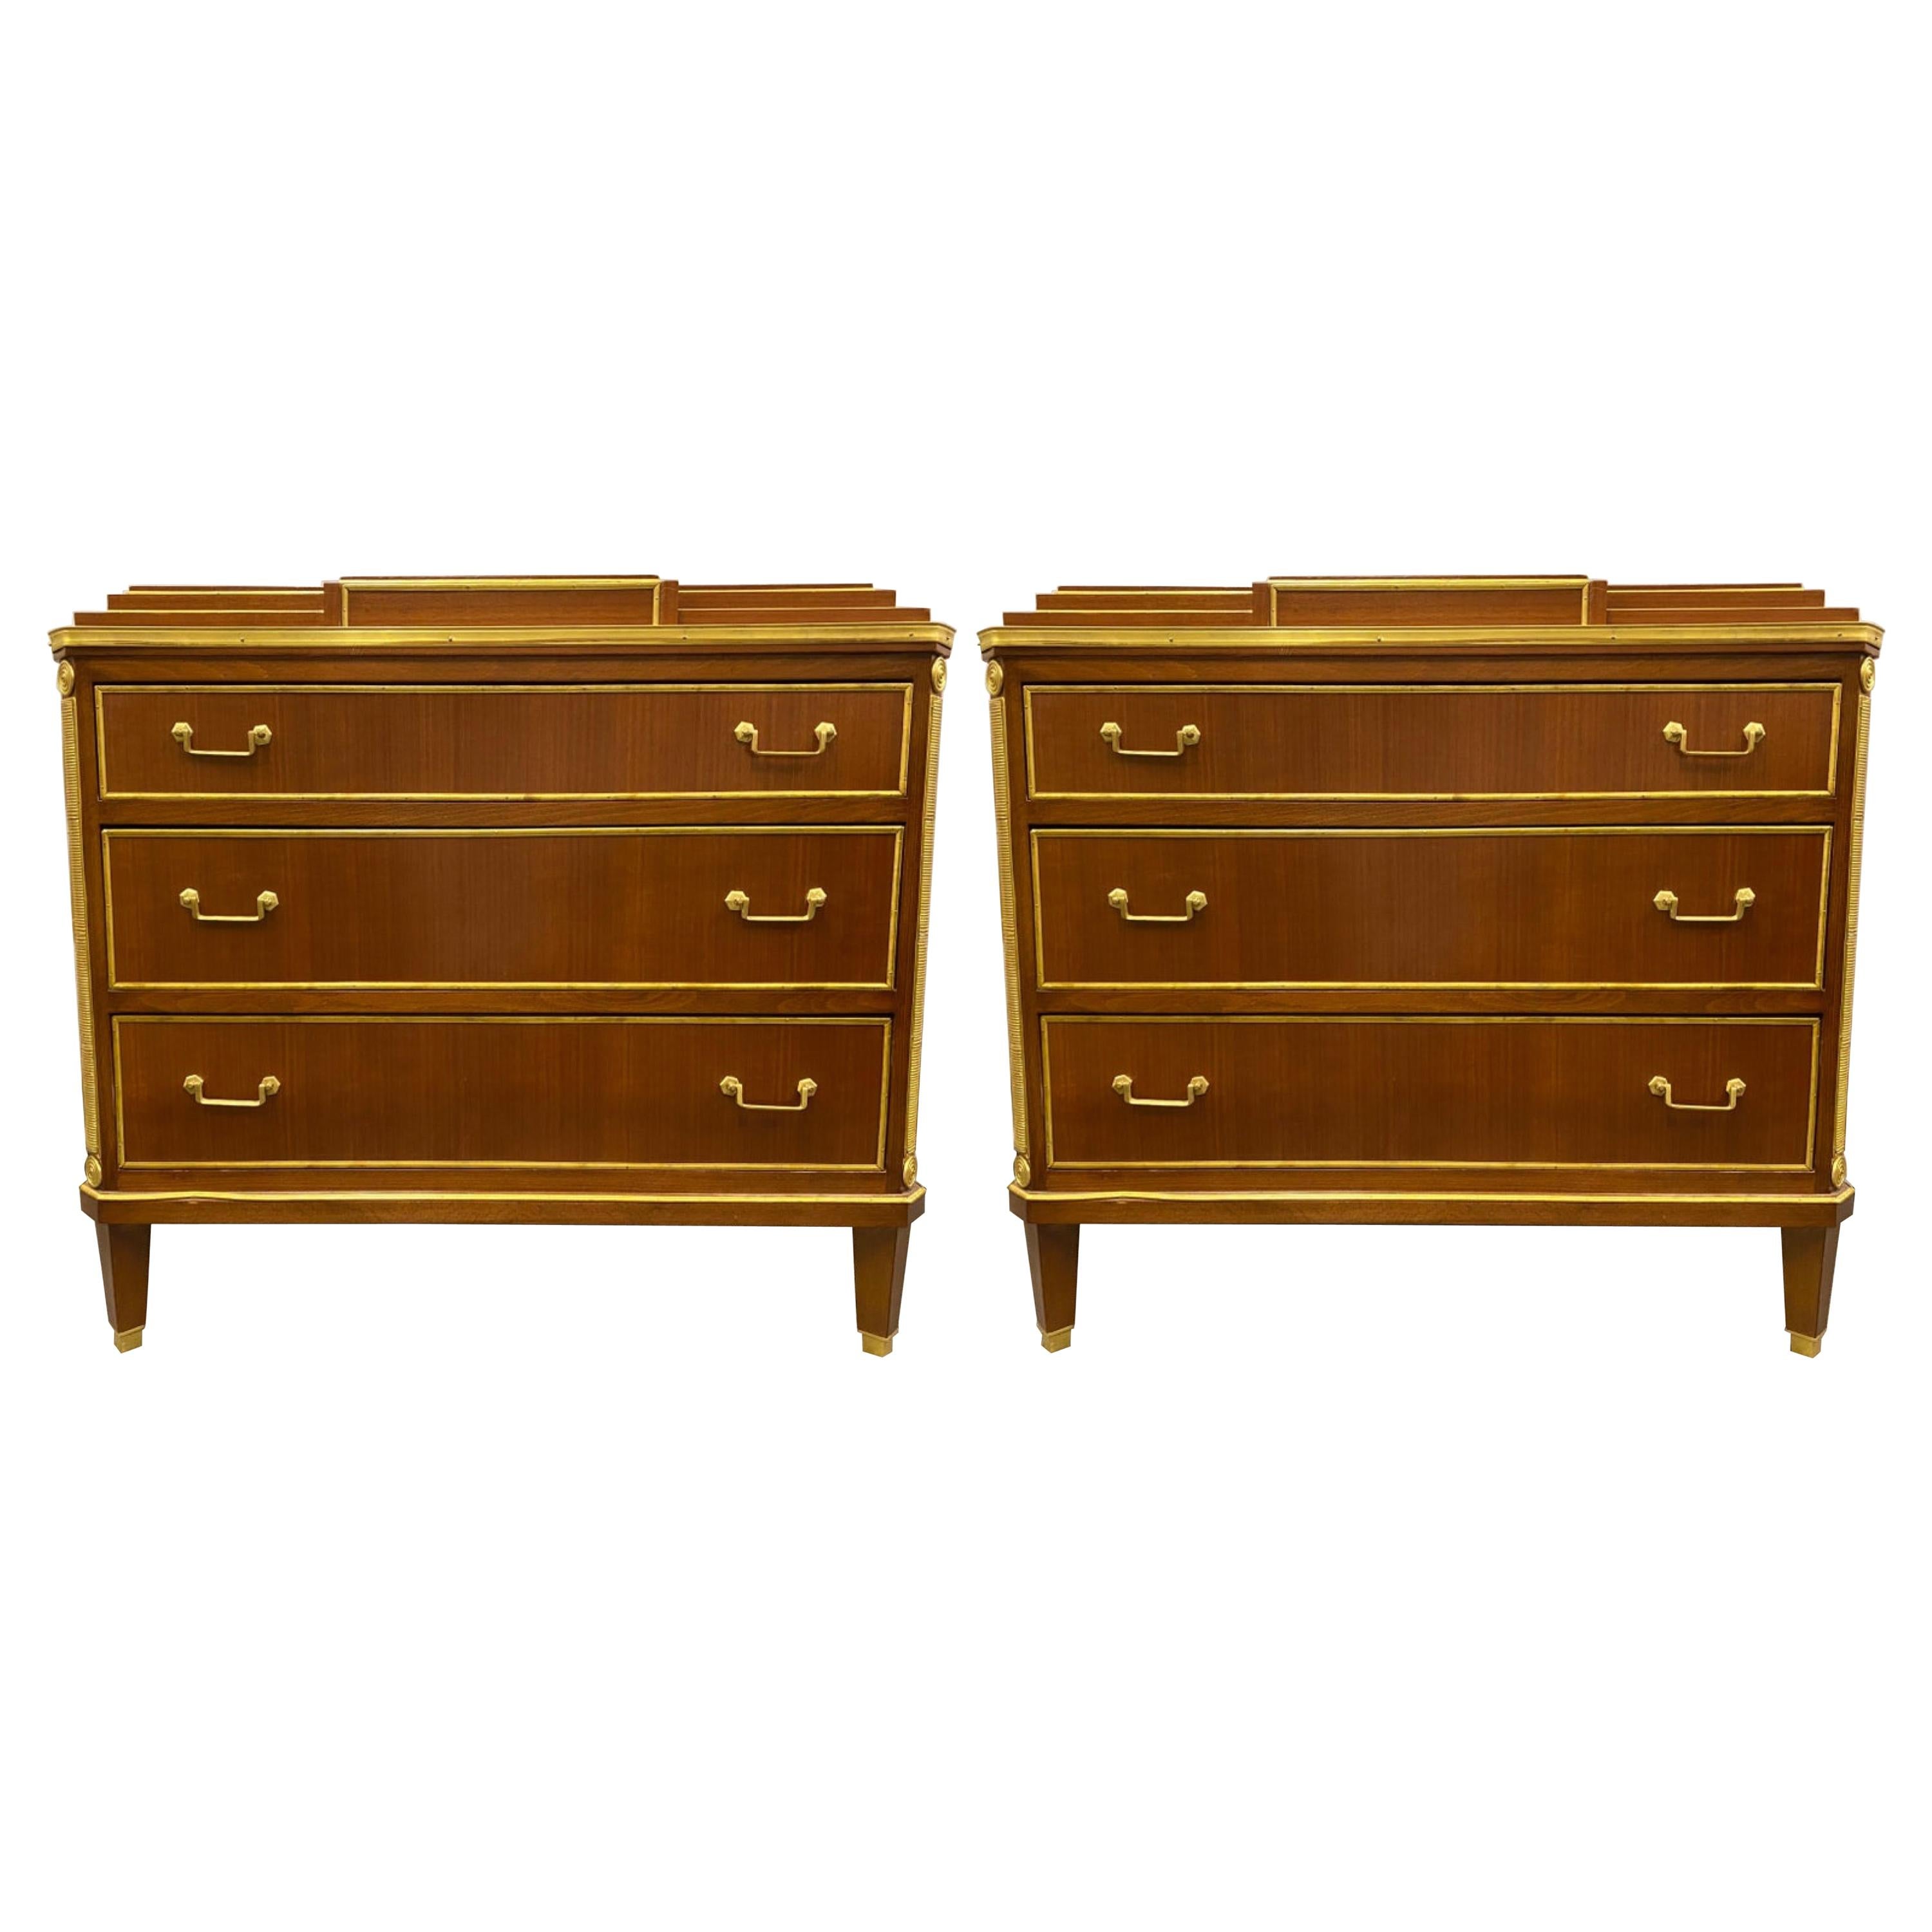 Pair Mahogany Up Russian Neoclassical Style Commodes / Nightstands